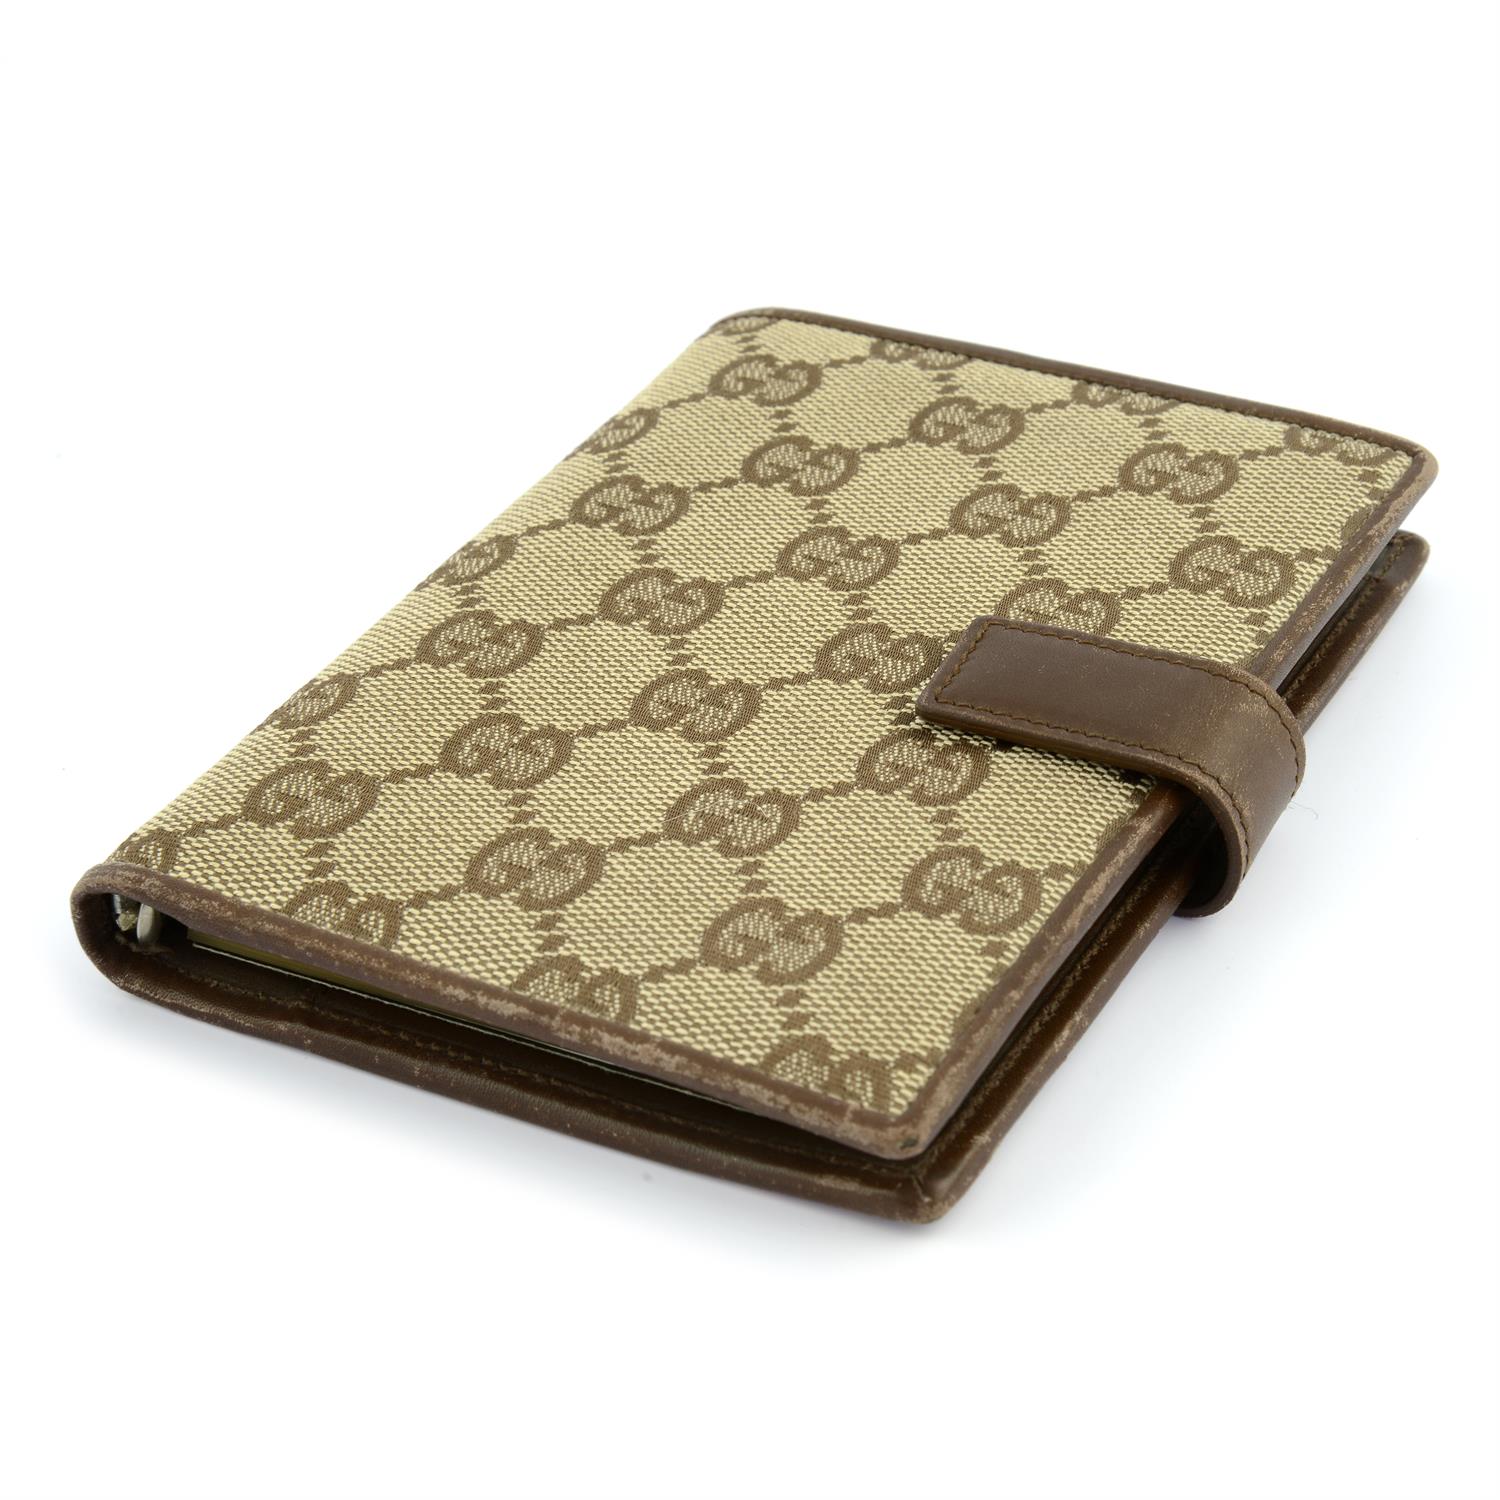 GUCCI - a Guccissima address book and note pad. - Image 3 of 4